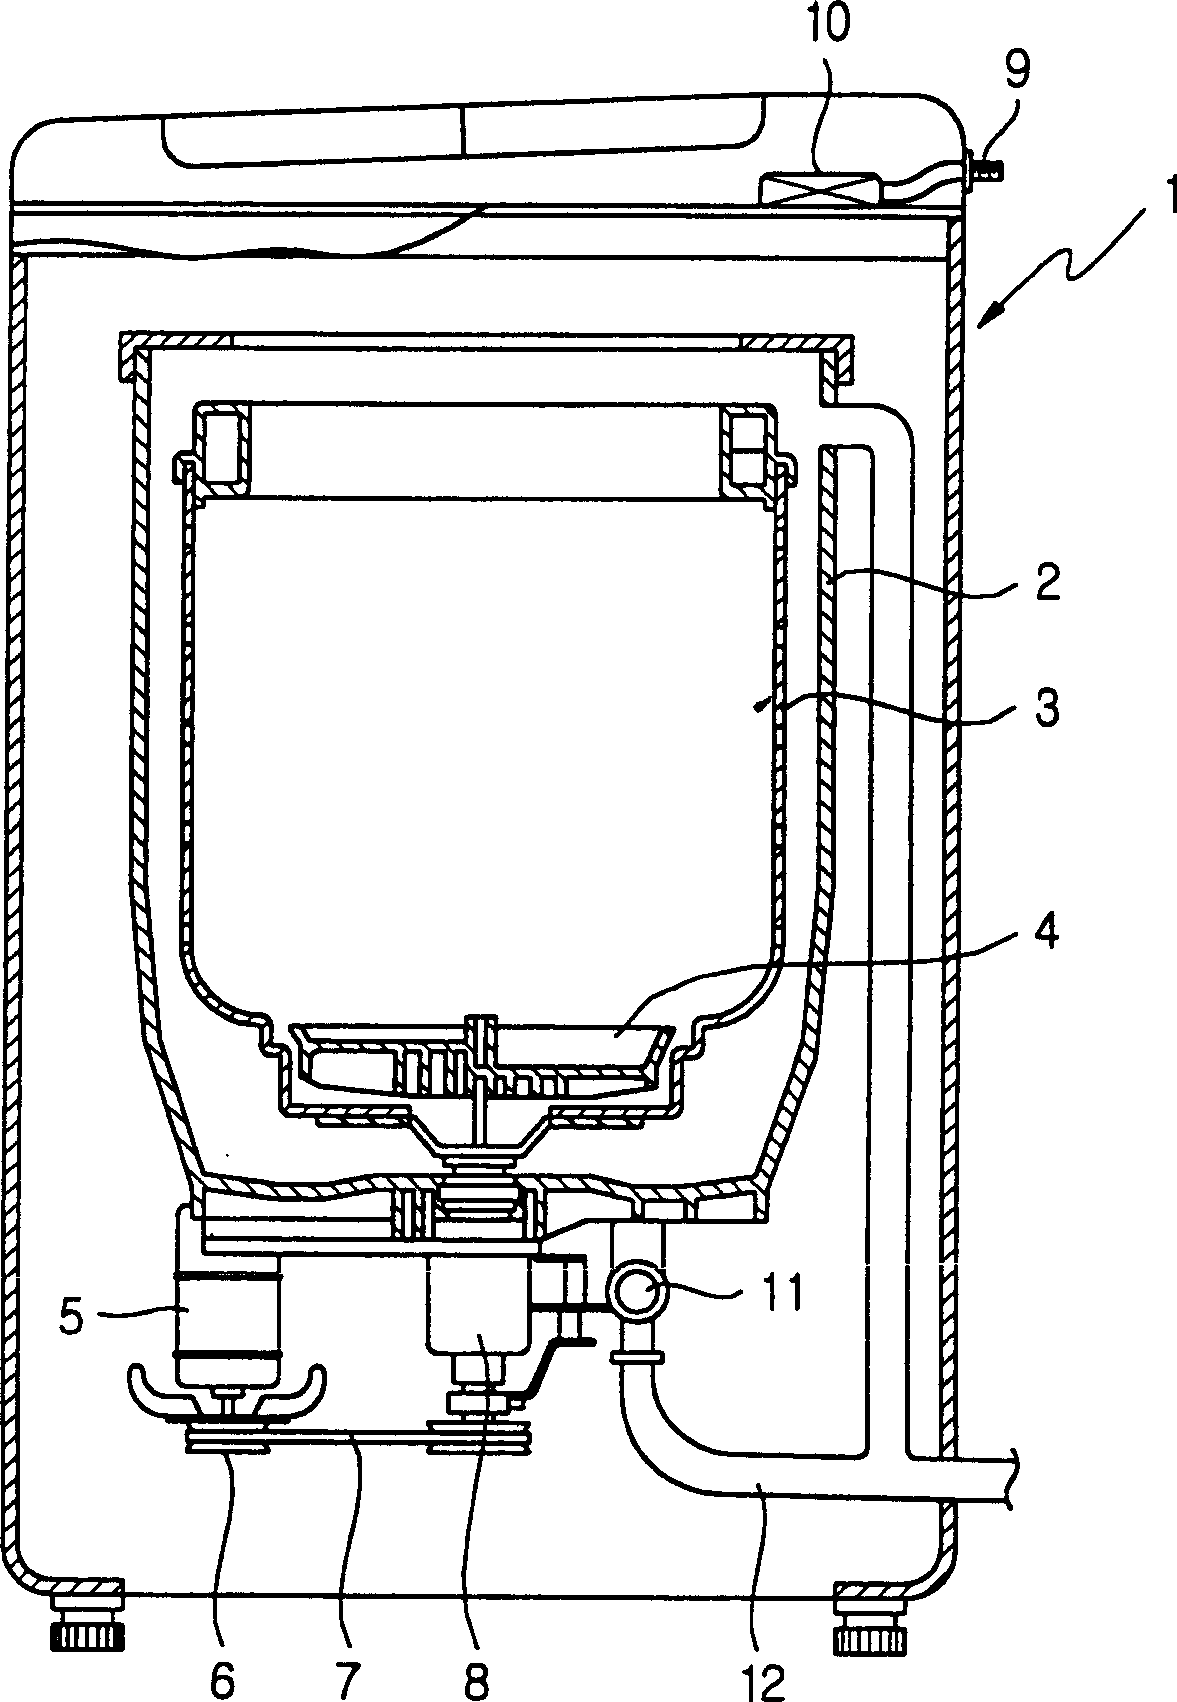 Controlling method for washing procedure of washer